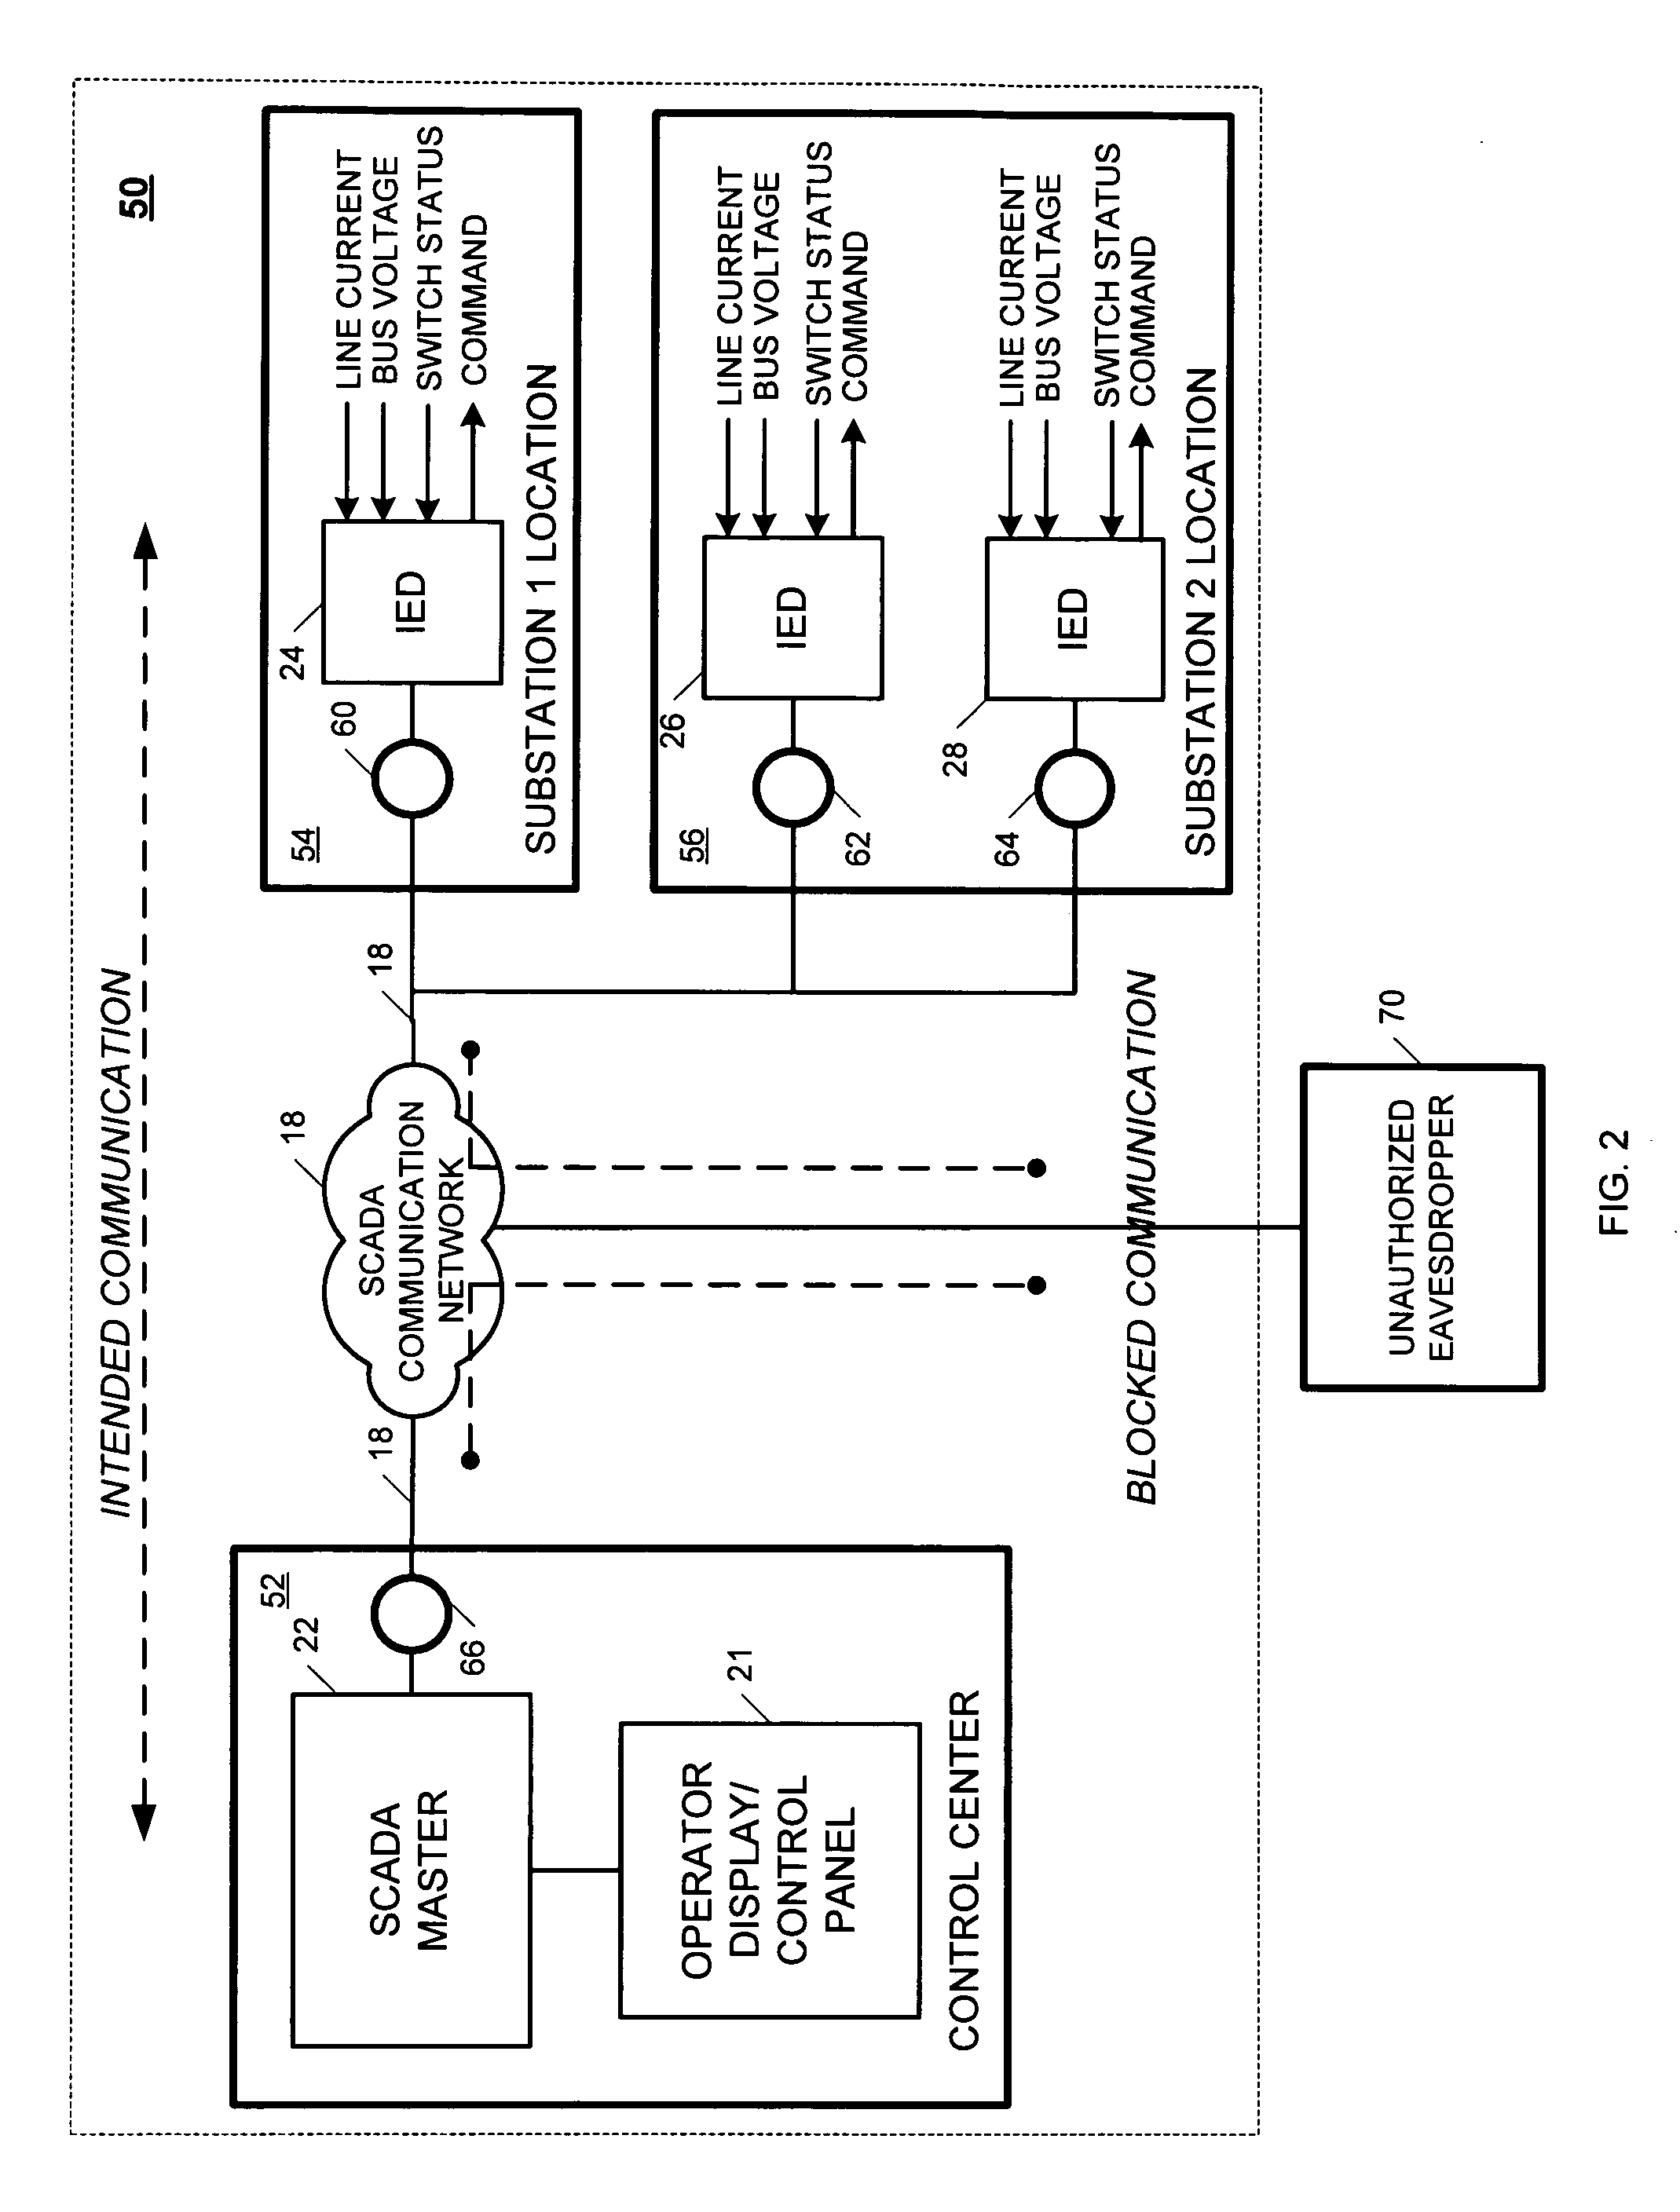 Method and apparatus for reducing communication system downtime when configuring a cryptographic system of the communication system